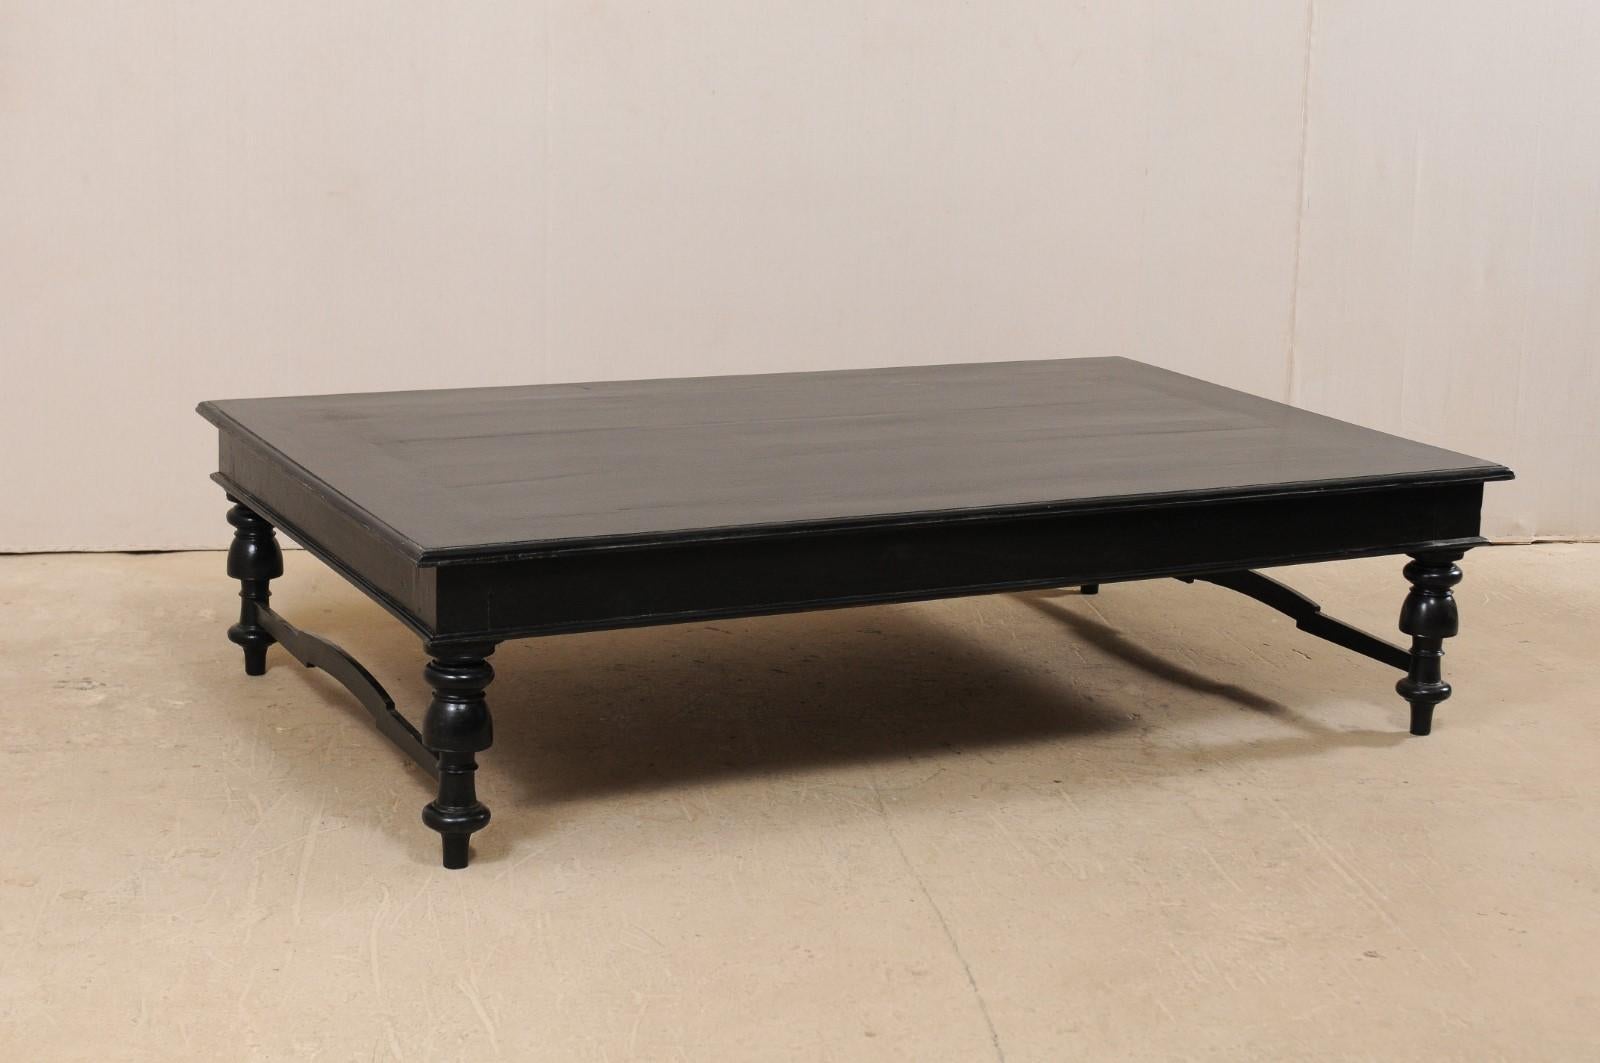 A handsome black British Colonial day bed, from the mid-20th century, which makes for a wonderful modern-use coffee table. This vintage piece from India features a 7 ft long, rectangular-shaped top with thick apron, which rests upon four beautifully